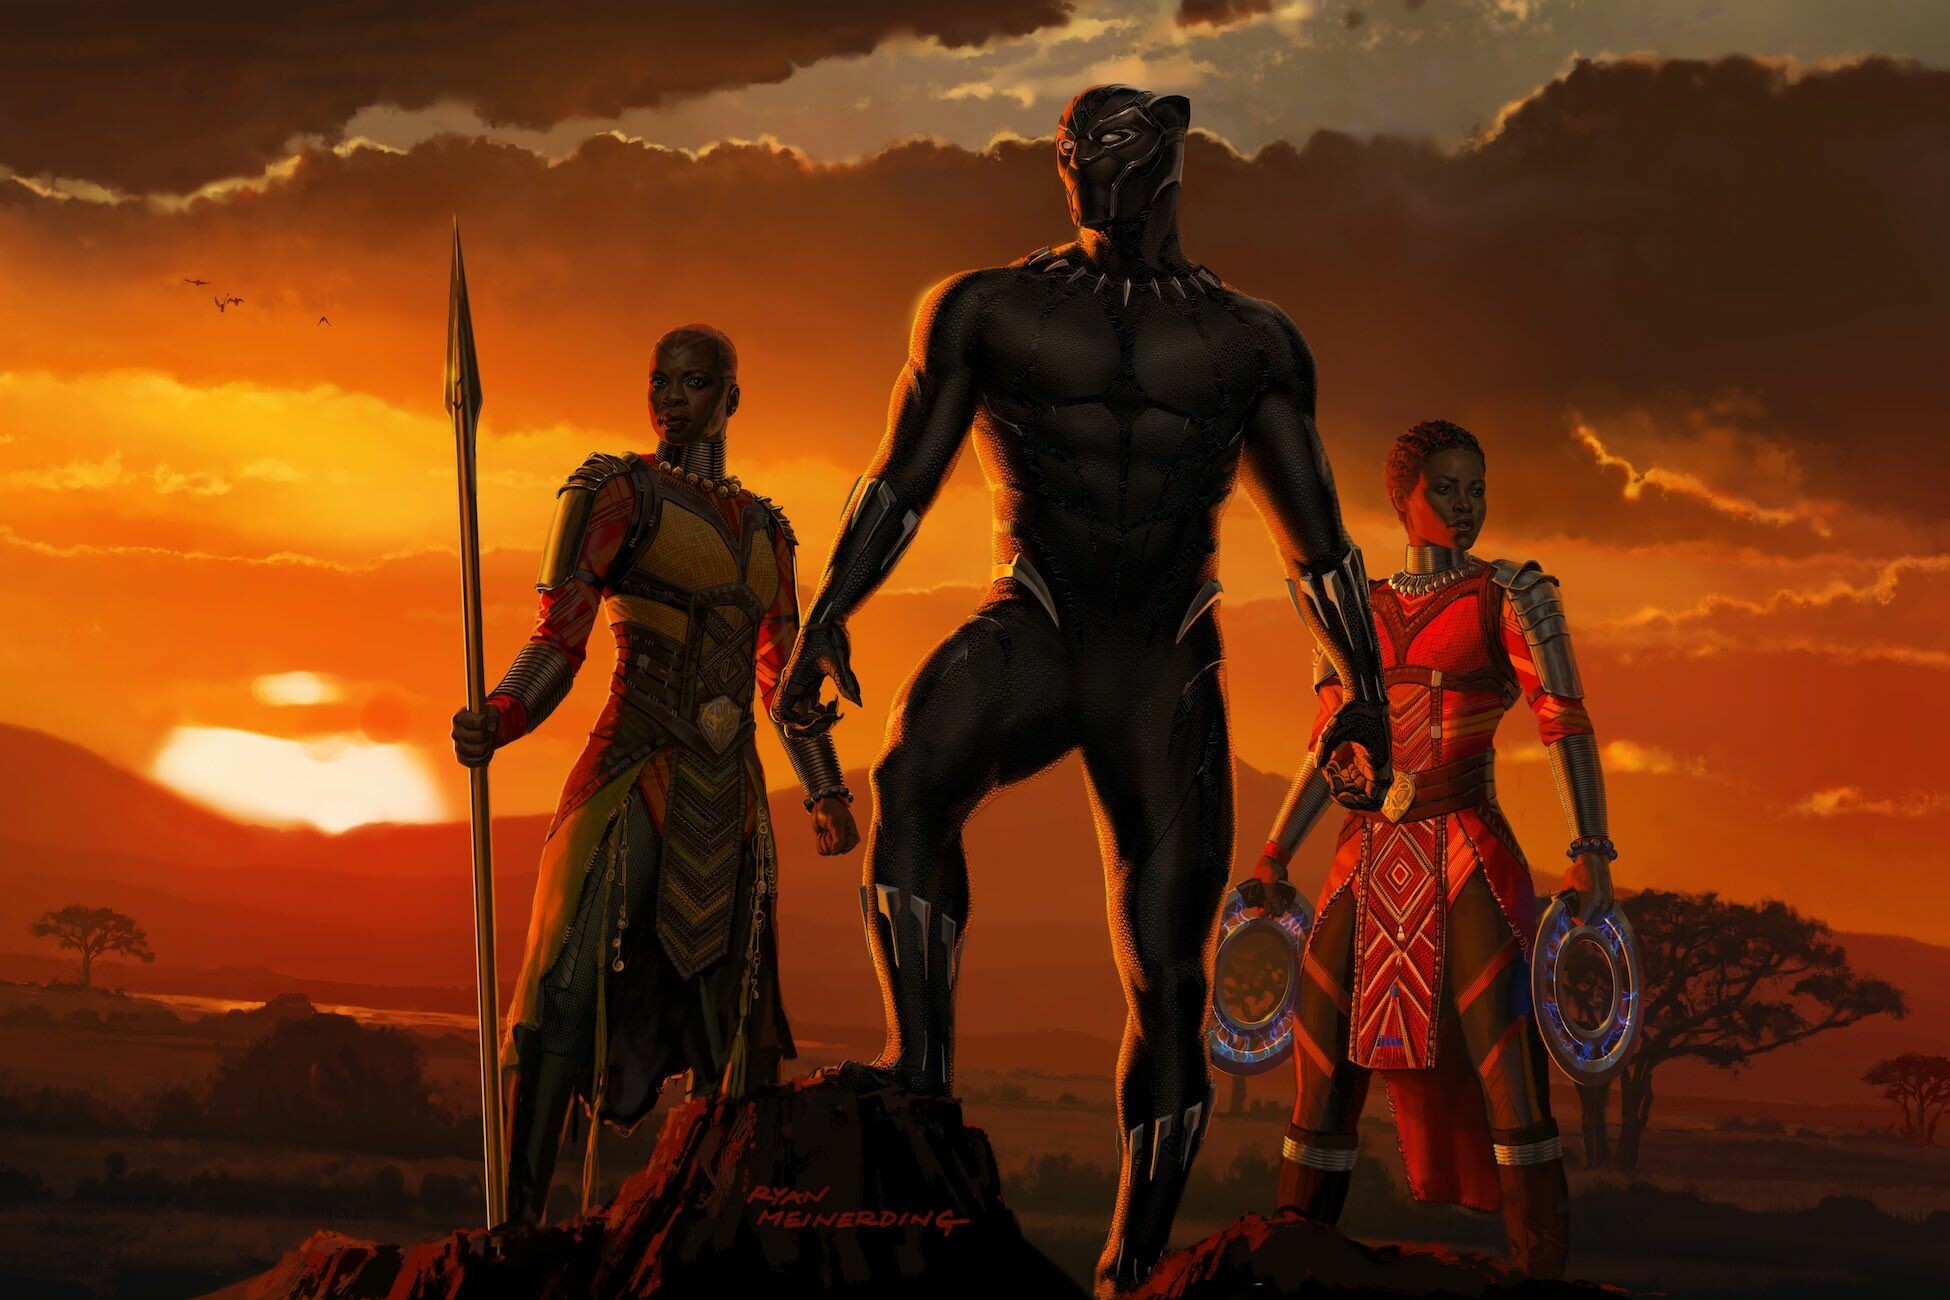 59+ Black Panther Movie Wallpapers: HD, 4K, 5K for PC and Mobile | Download  free images for iPhone, Android